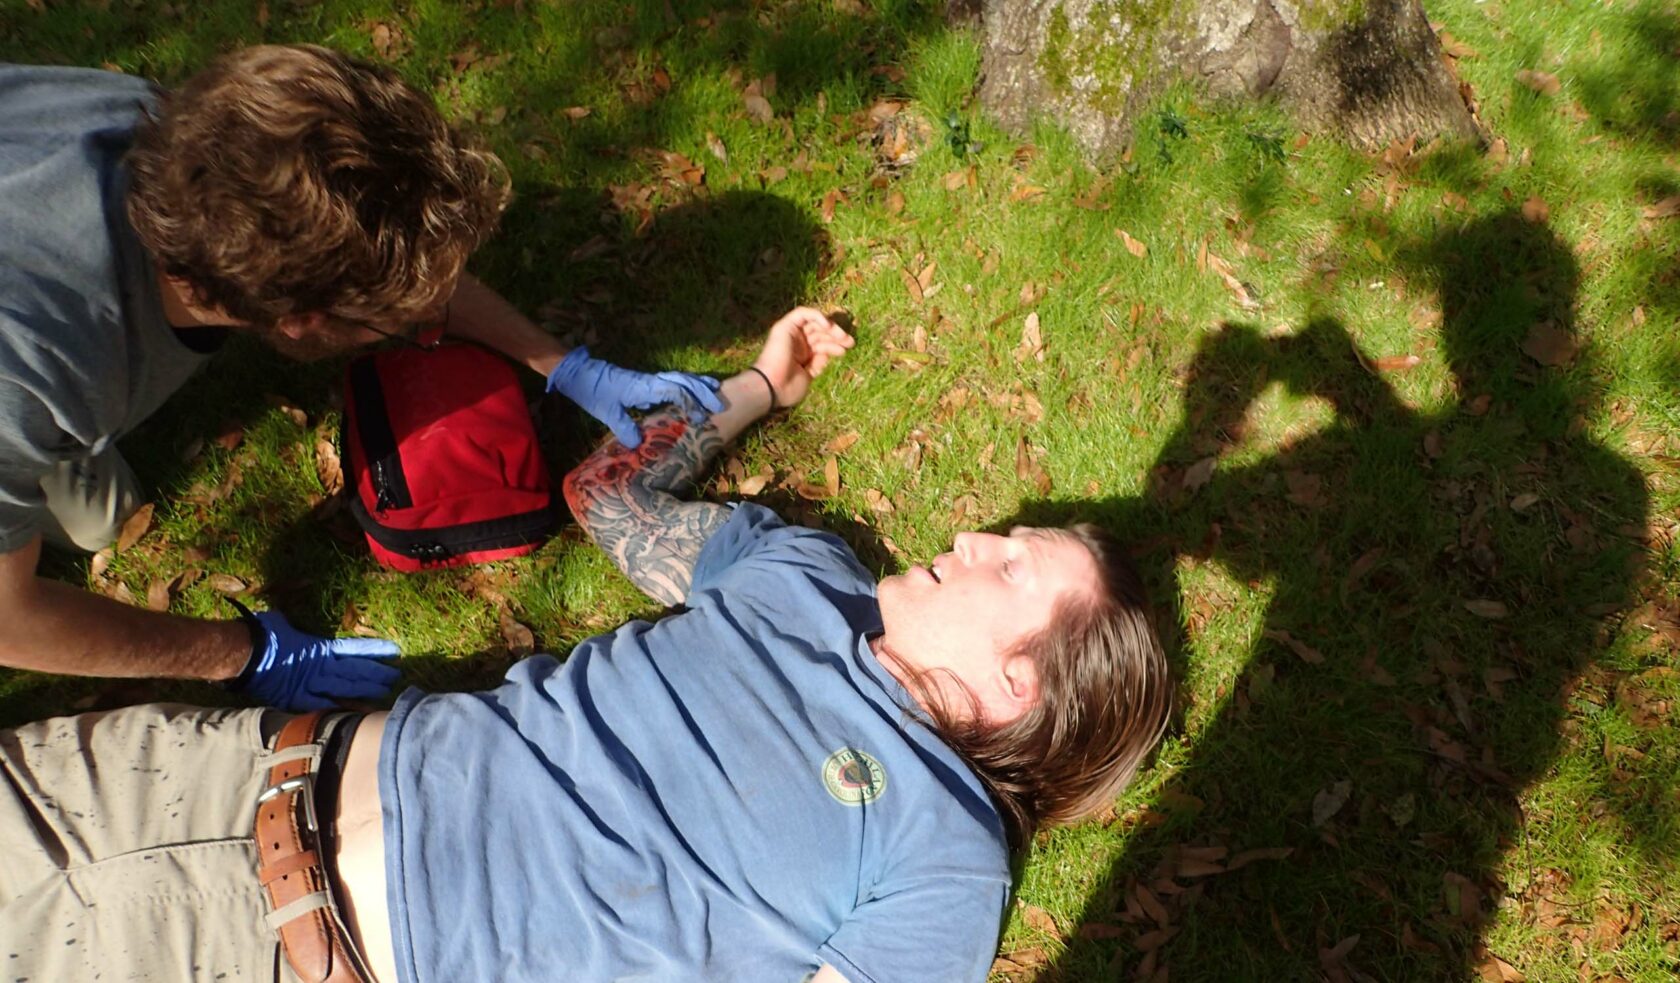 A wilderness medicine personnel examining a patient in a field.